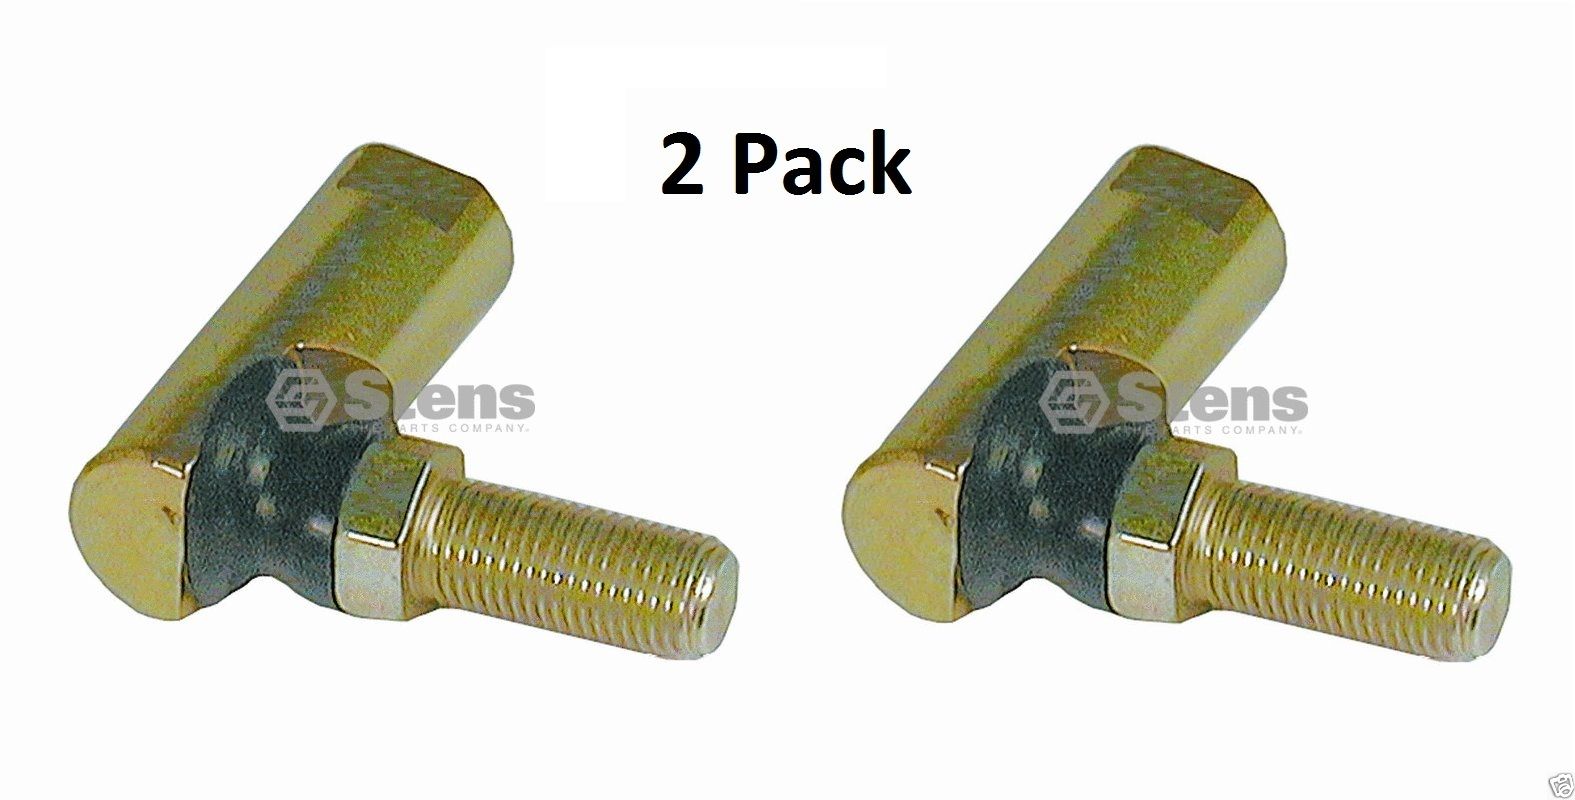 2 Pack Stens 245-027 Ball Joint for 923-0156 109850X 108078 923-3018 1-373077